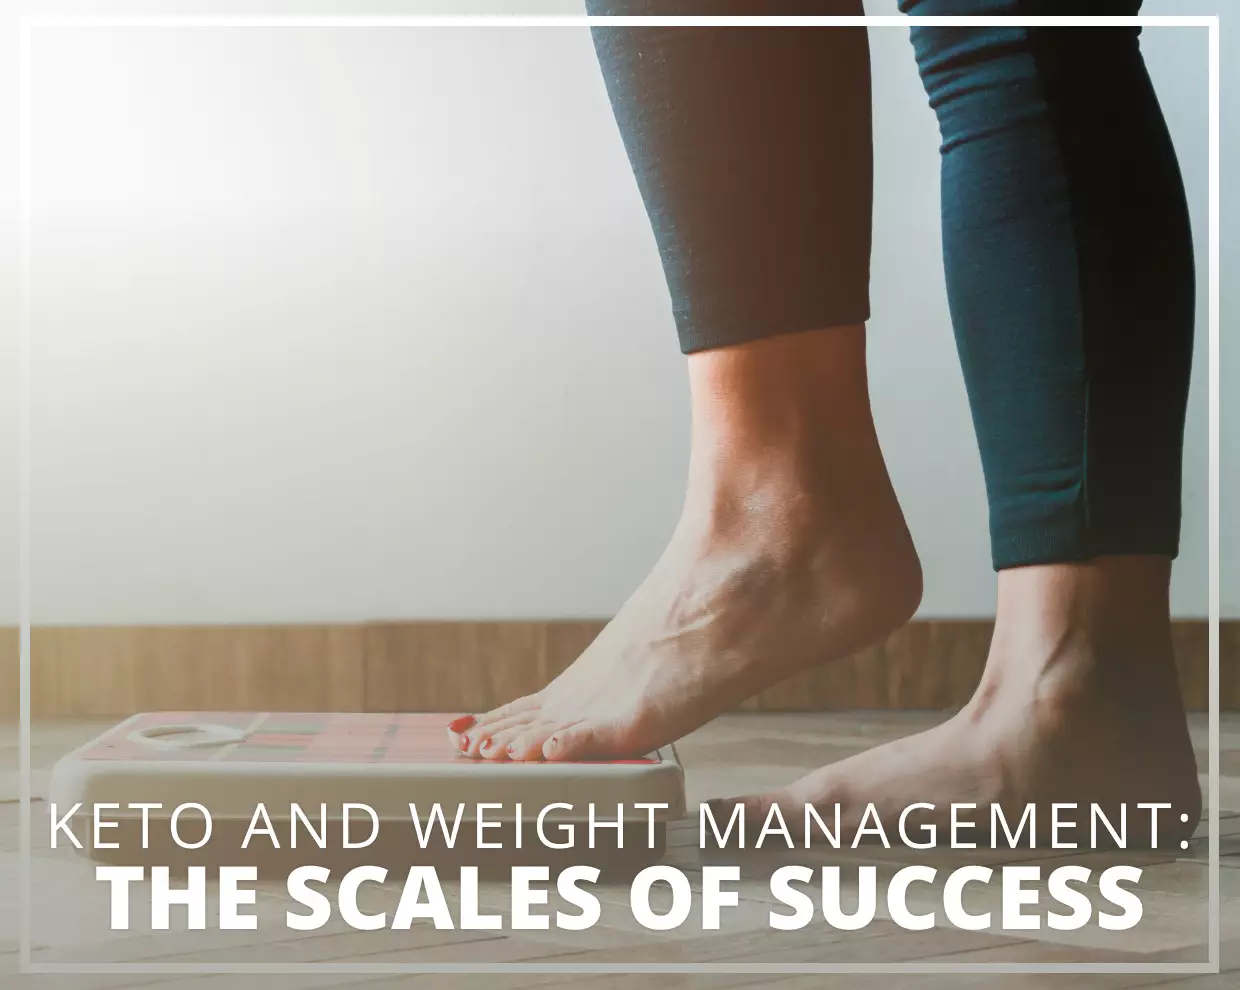 Keto and Weight Management: The Scales of Success